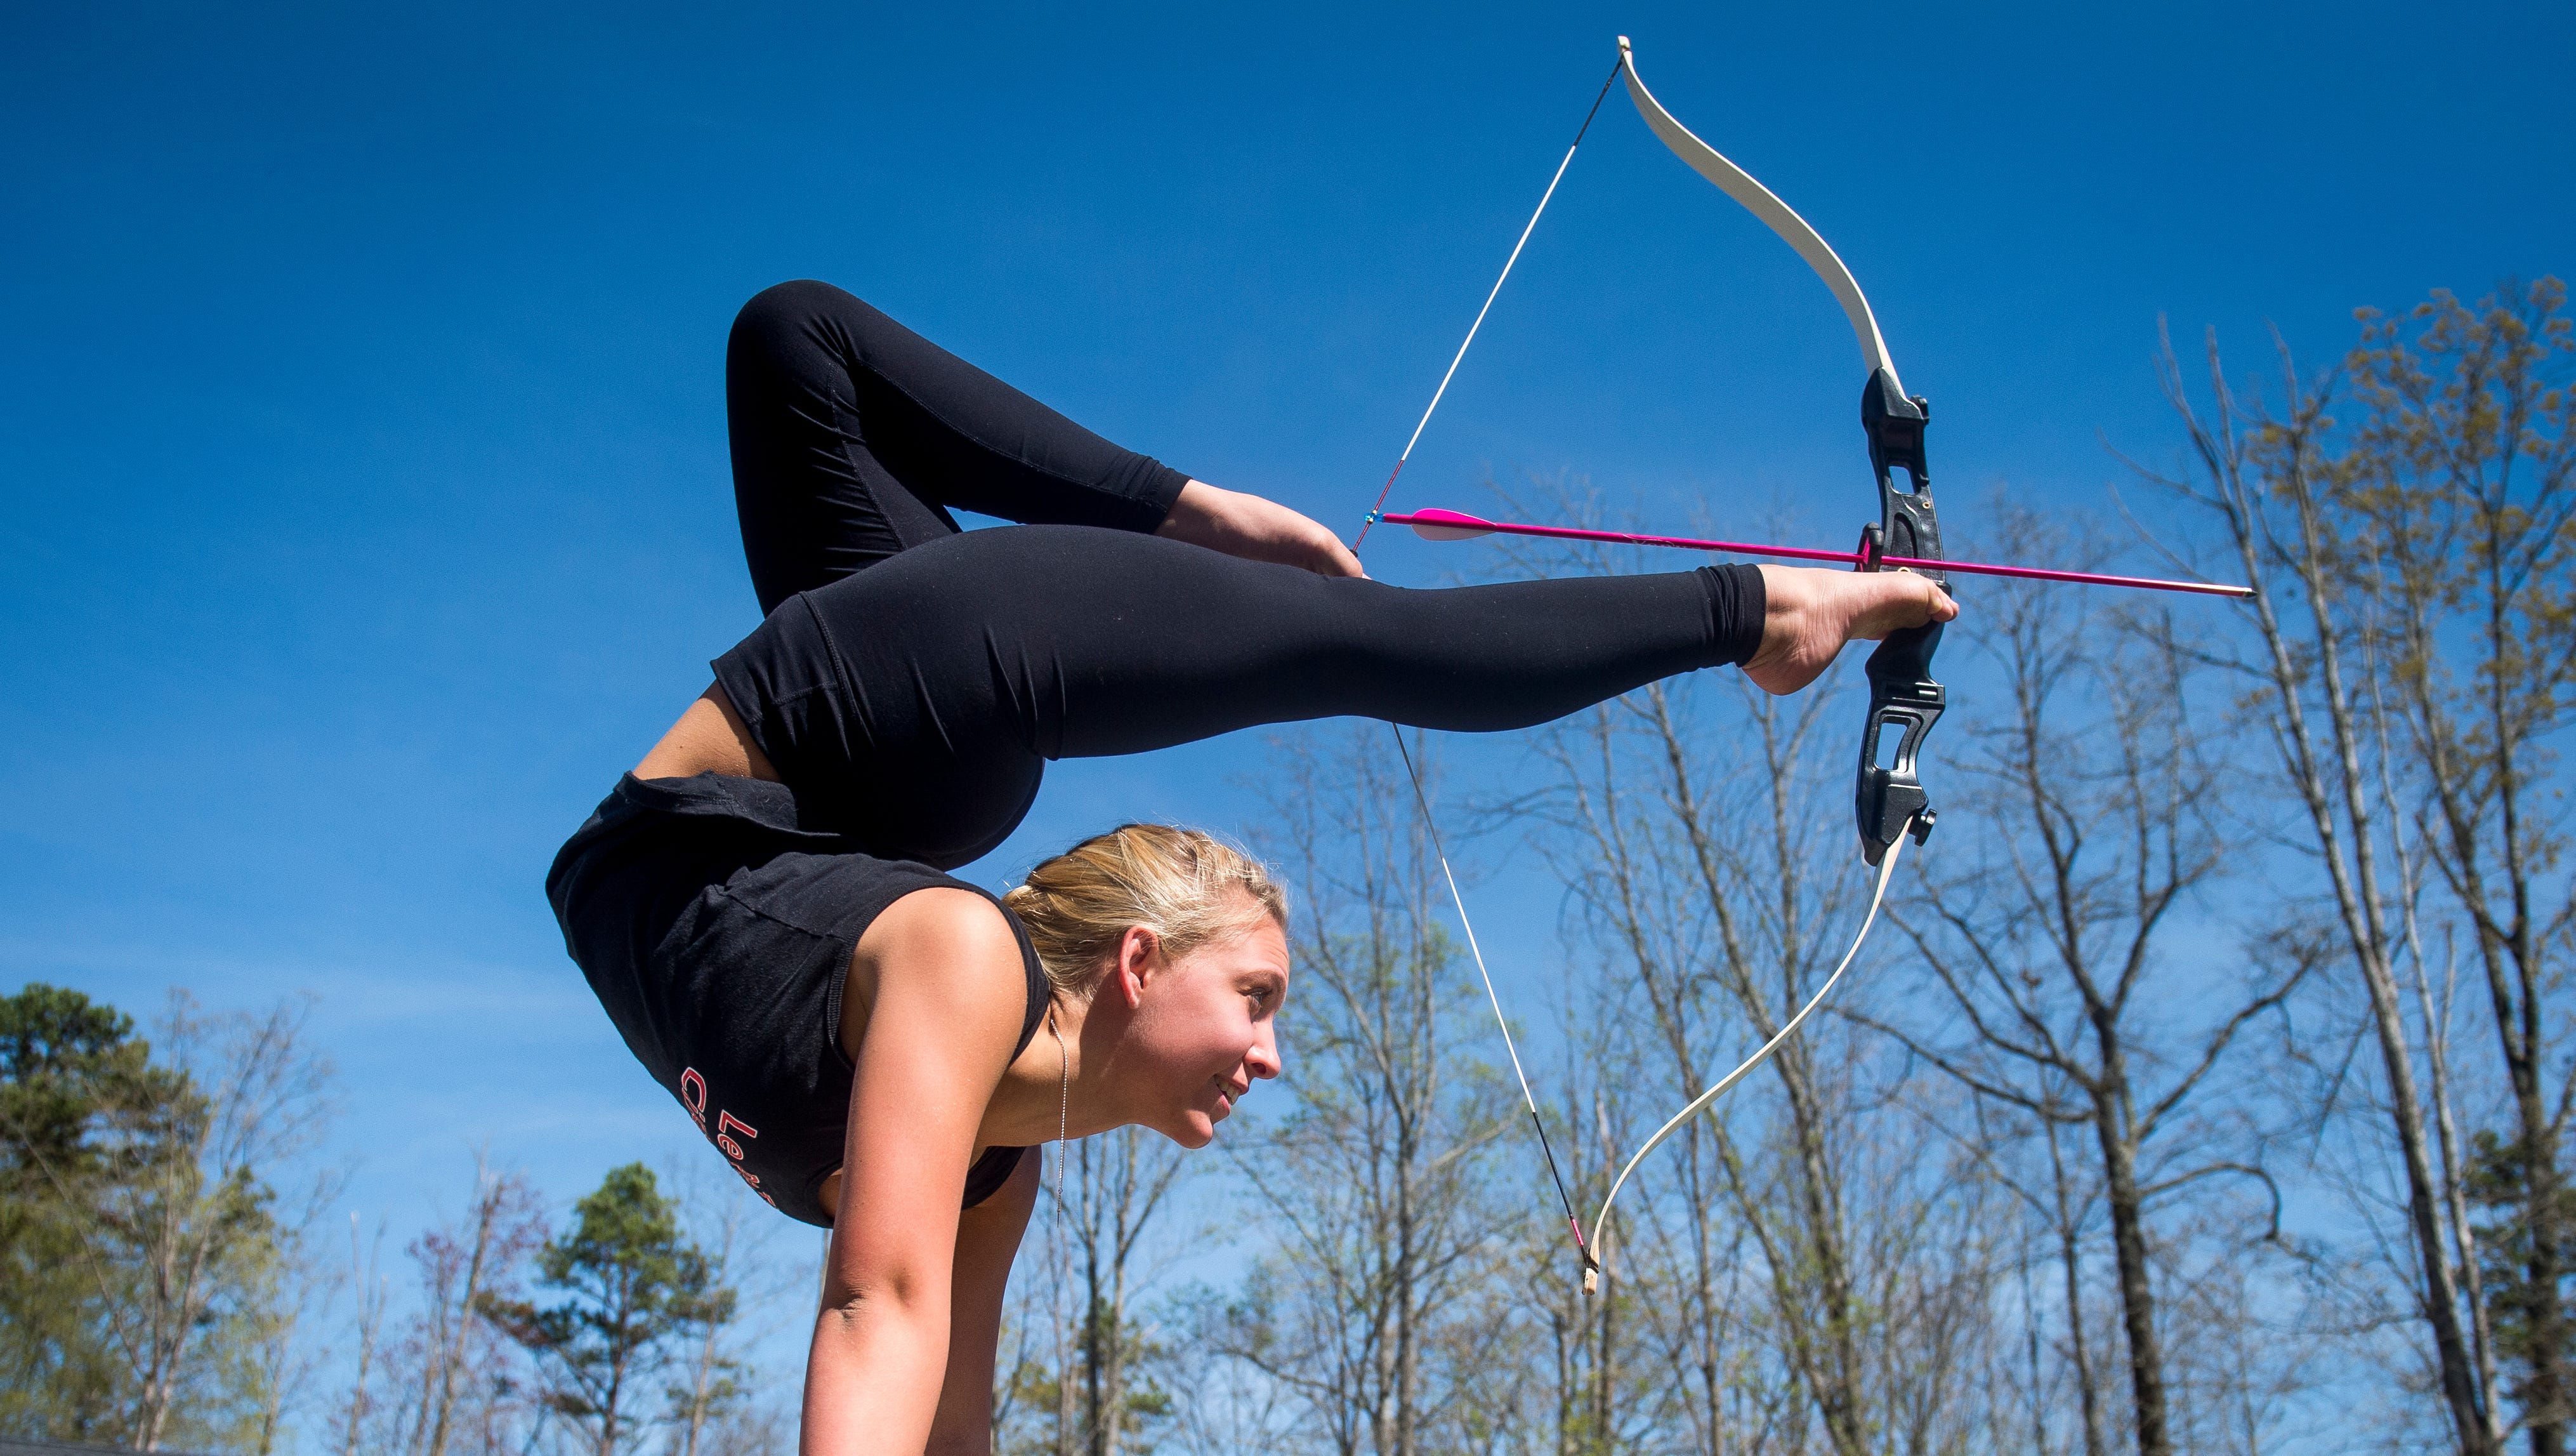 Feat Of Agility: Knox Teen Shoots Bow & Arrow Using Only Her Toes